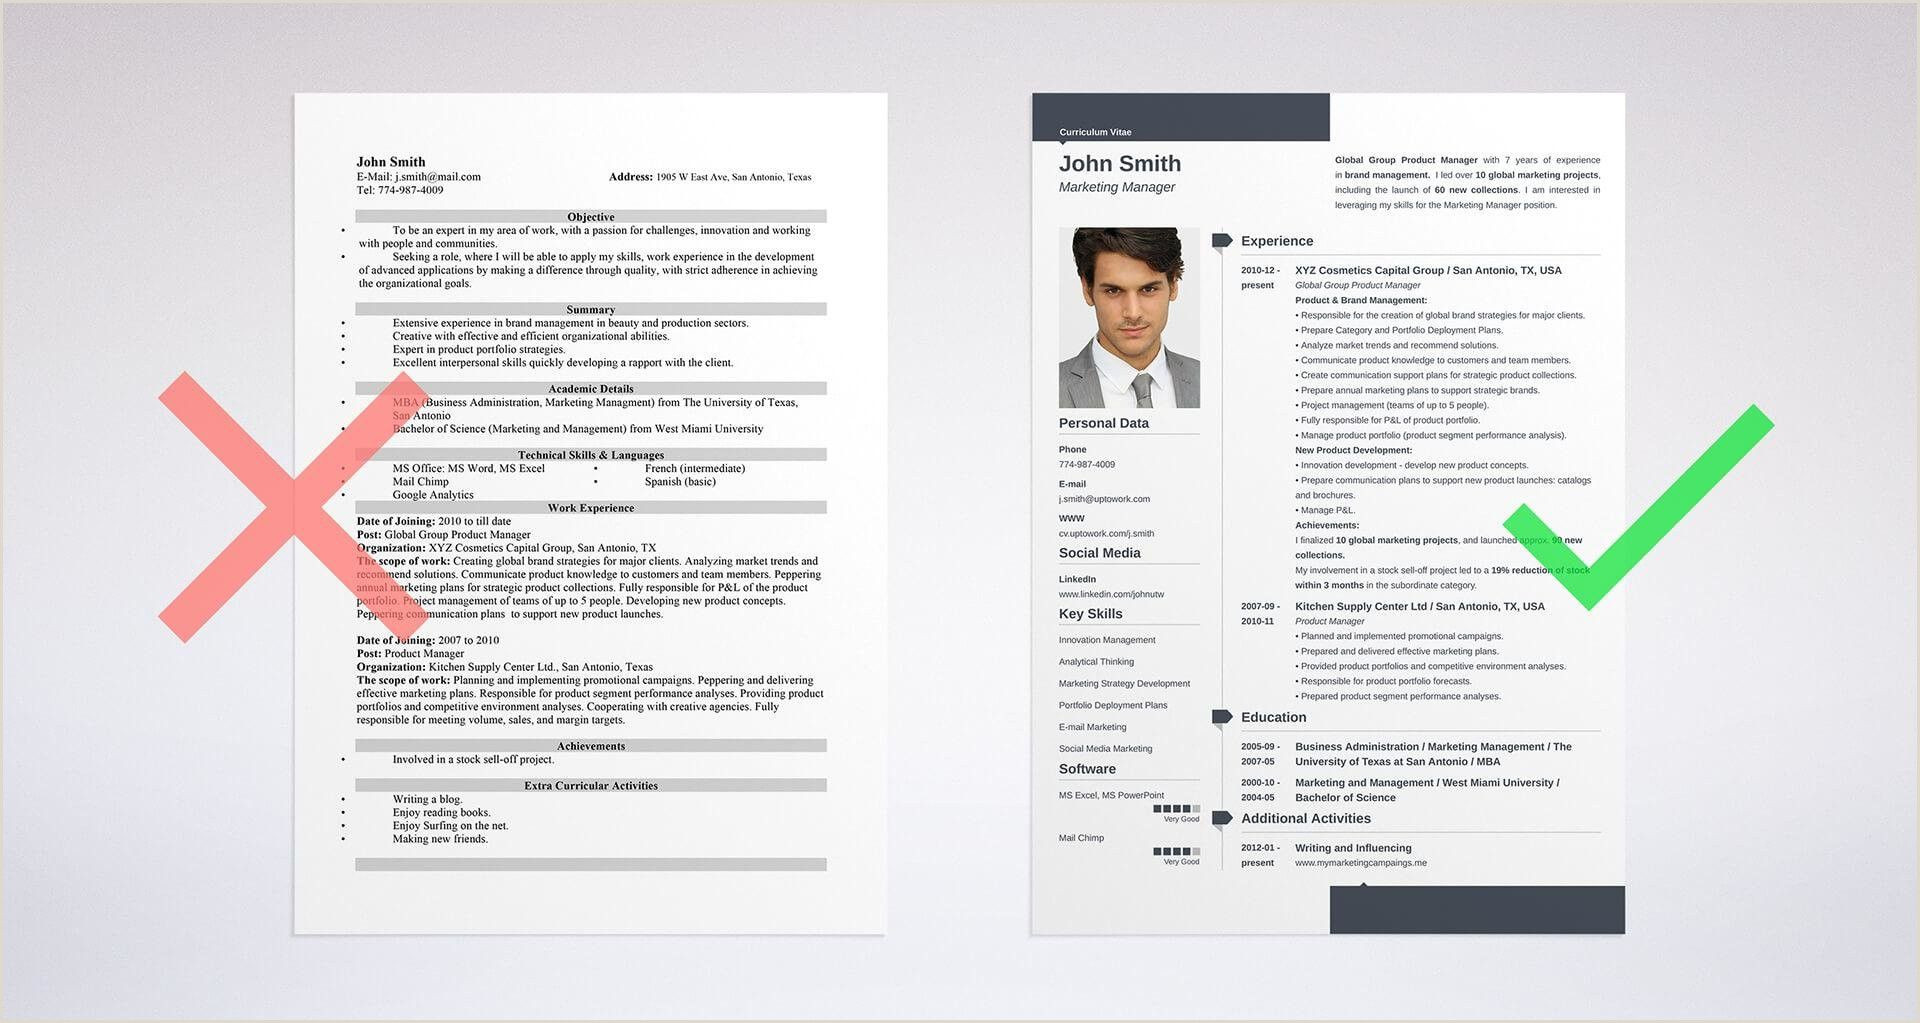 Sample Resume for Fresh Graduate without Work Experience Sample Resume for Fresh Graduate without Work Experience